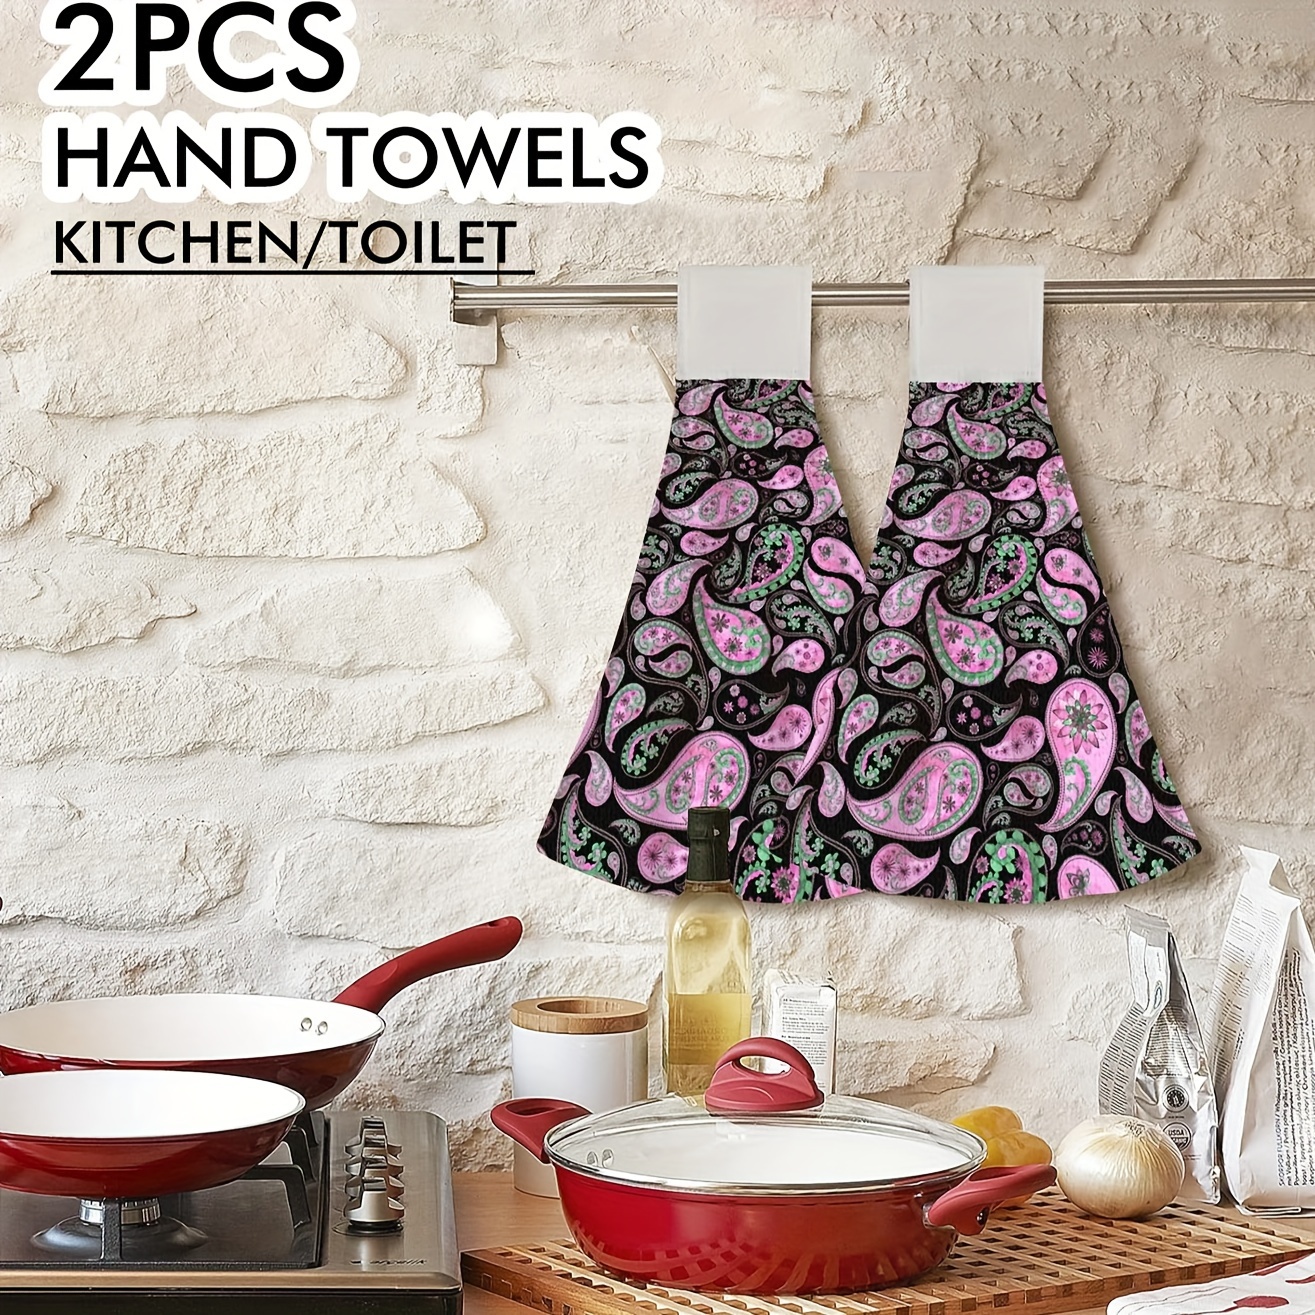 Kitchen Hand Towels, Hanging Towel For Wiping Hands, Highly